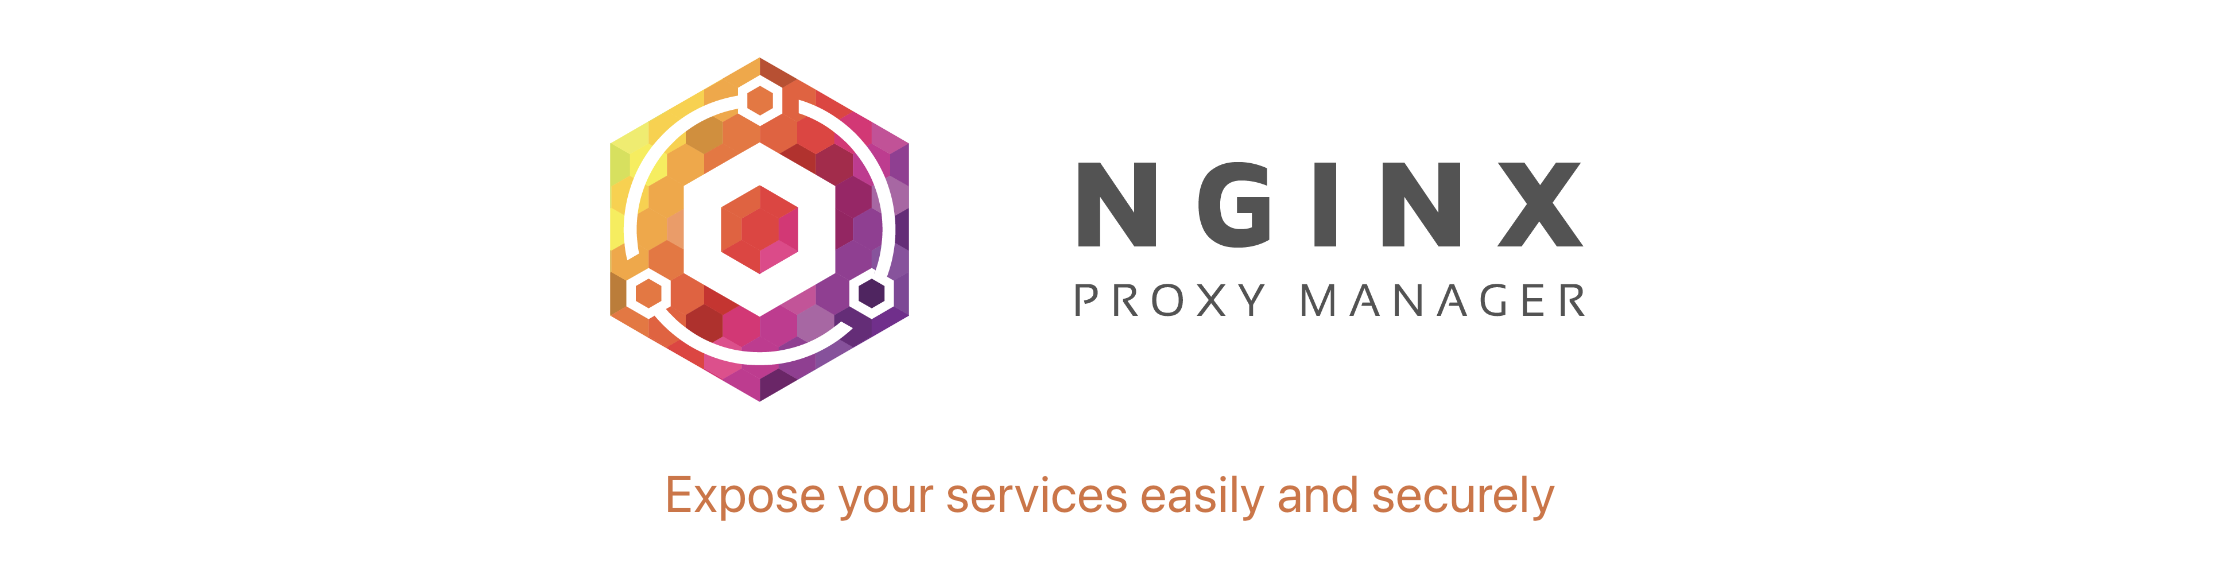 Source: Nginx Proxy Manager